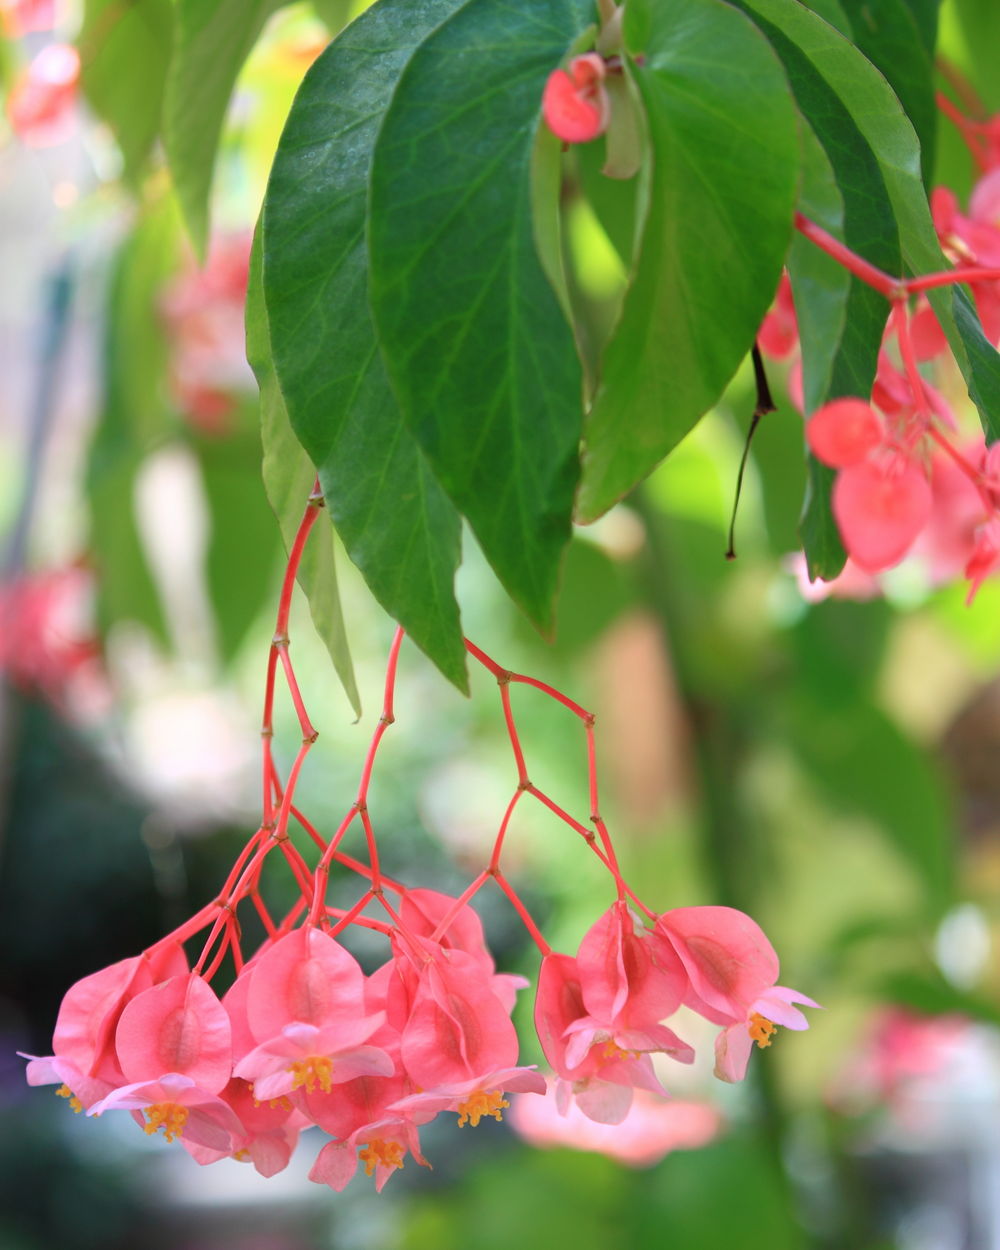 begonia ‘angel wing pink with green leaf’, angel wing begonia